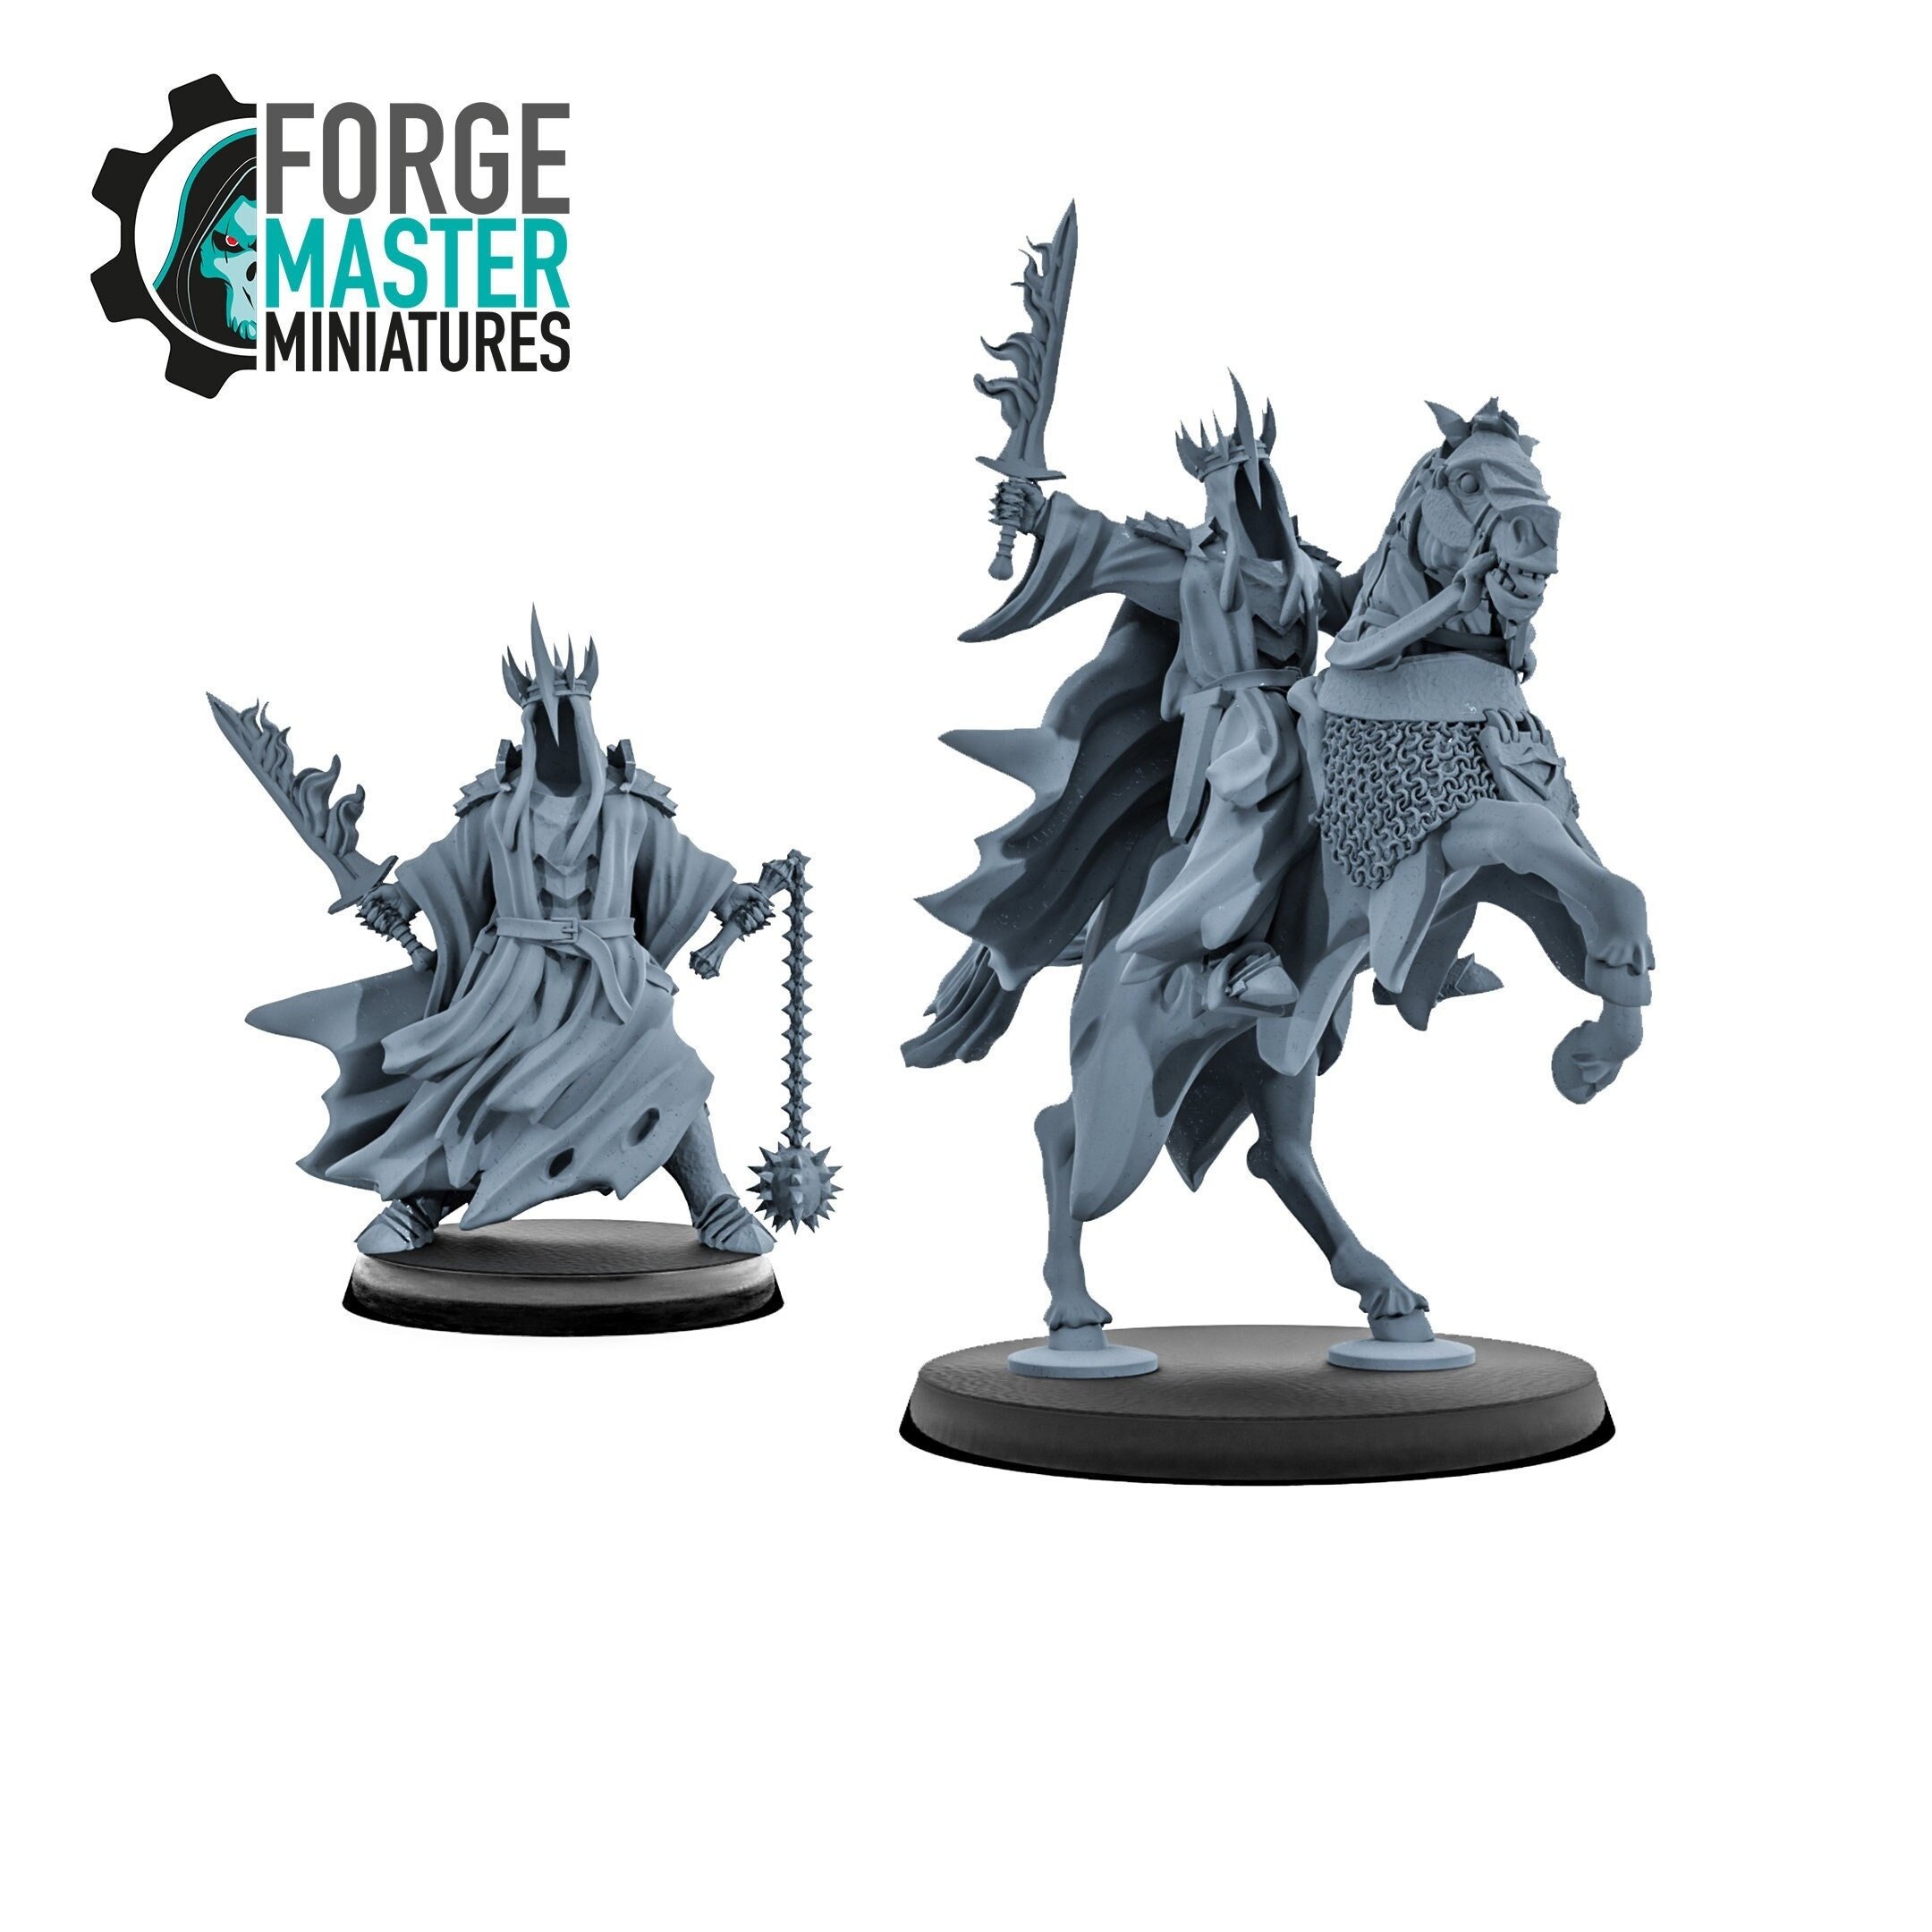 Wraith King wargaming miniature by Kzk Minis 3D Printed by Forgemaster Miniatures